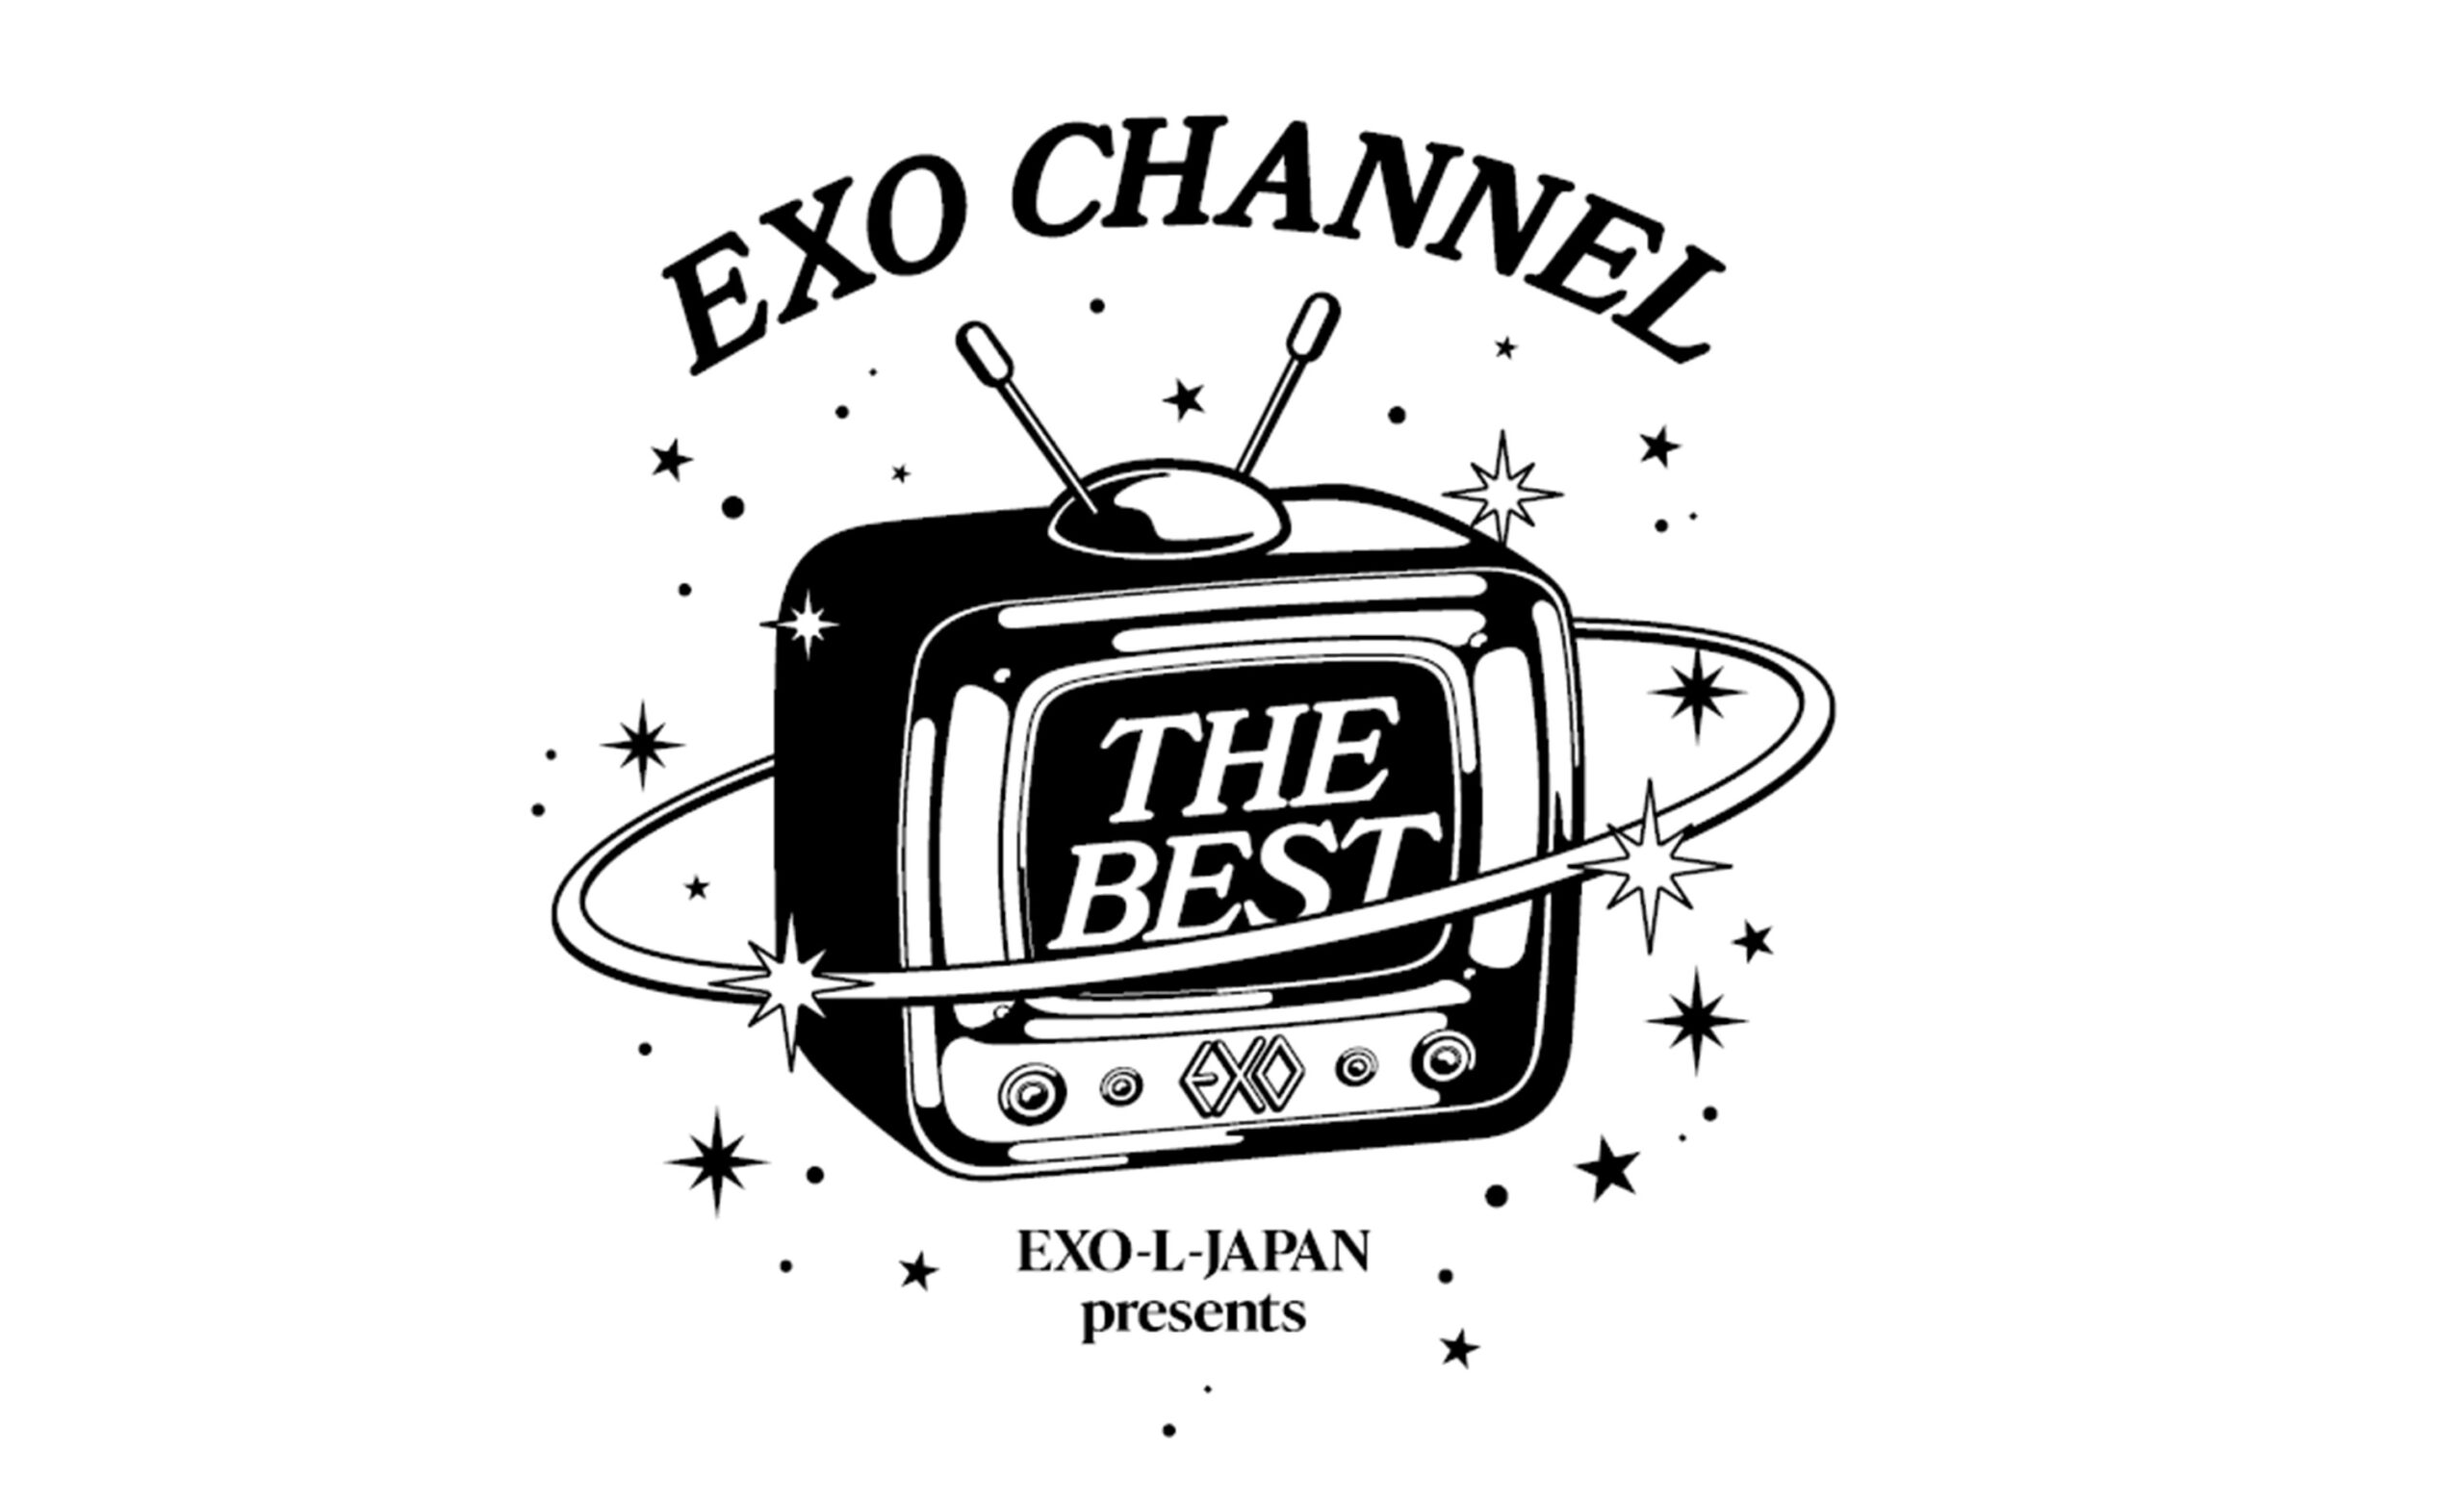 EXO-L-JAPAN presents EXO CHANNEL “THE BEST”】開催〜セットリスト ...